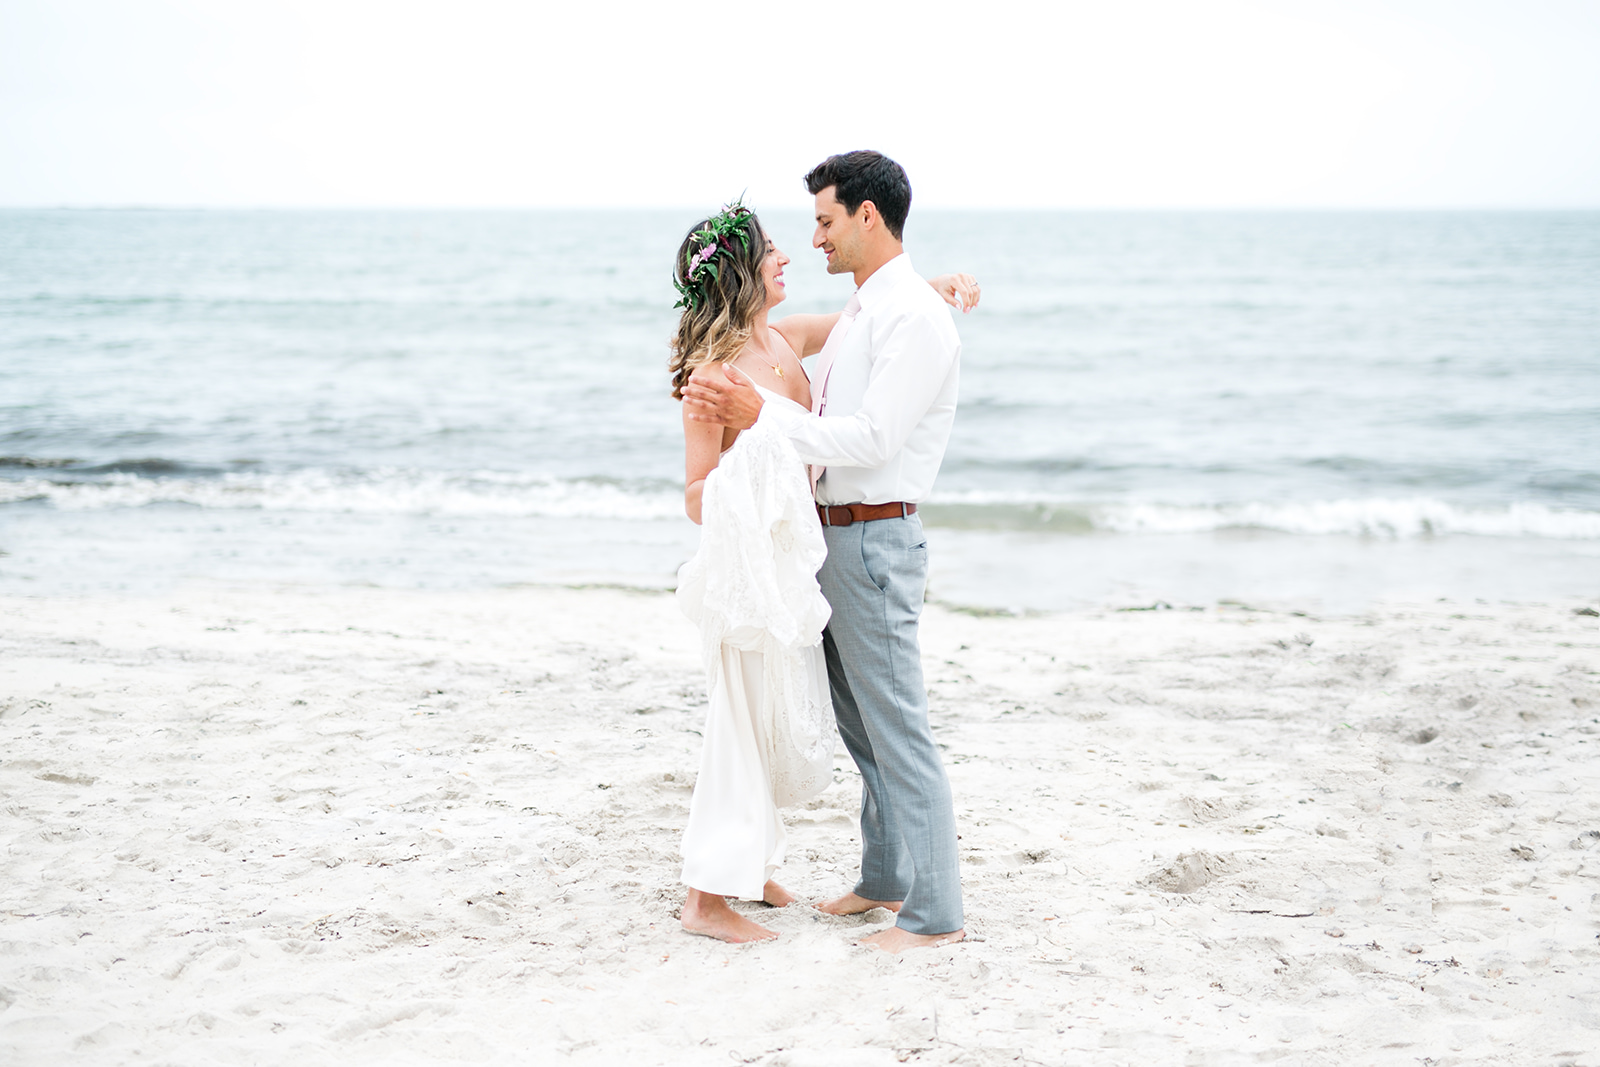 First look by the ocean - Pearl Weddings & Events